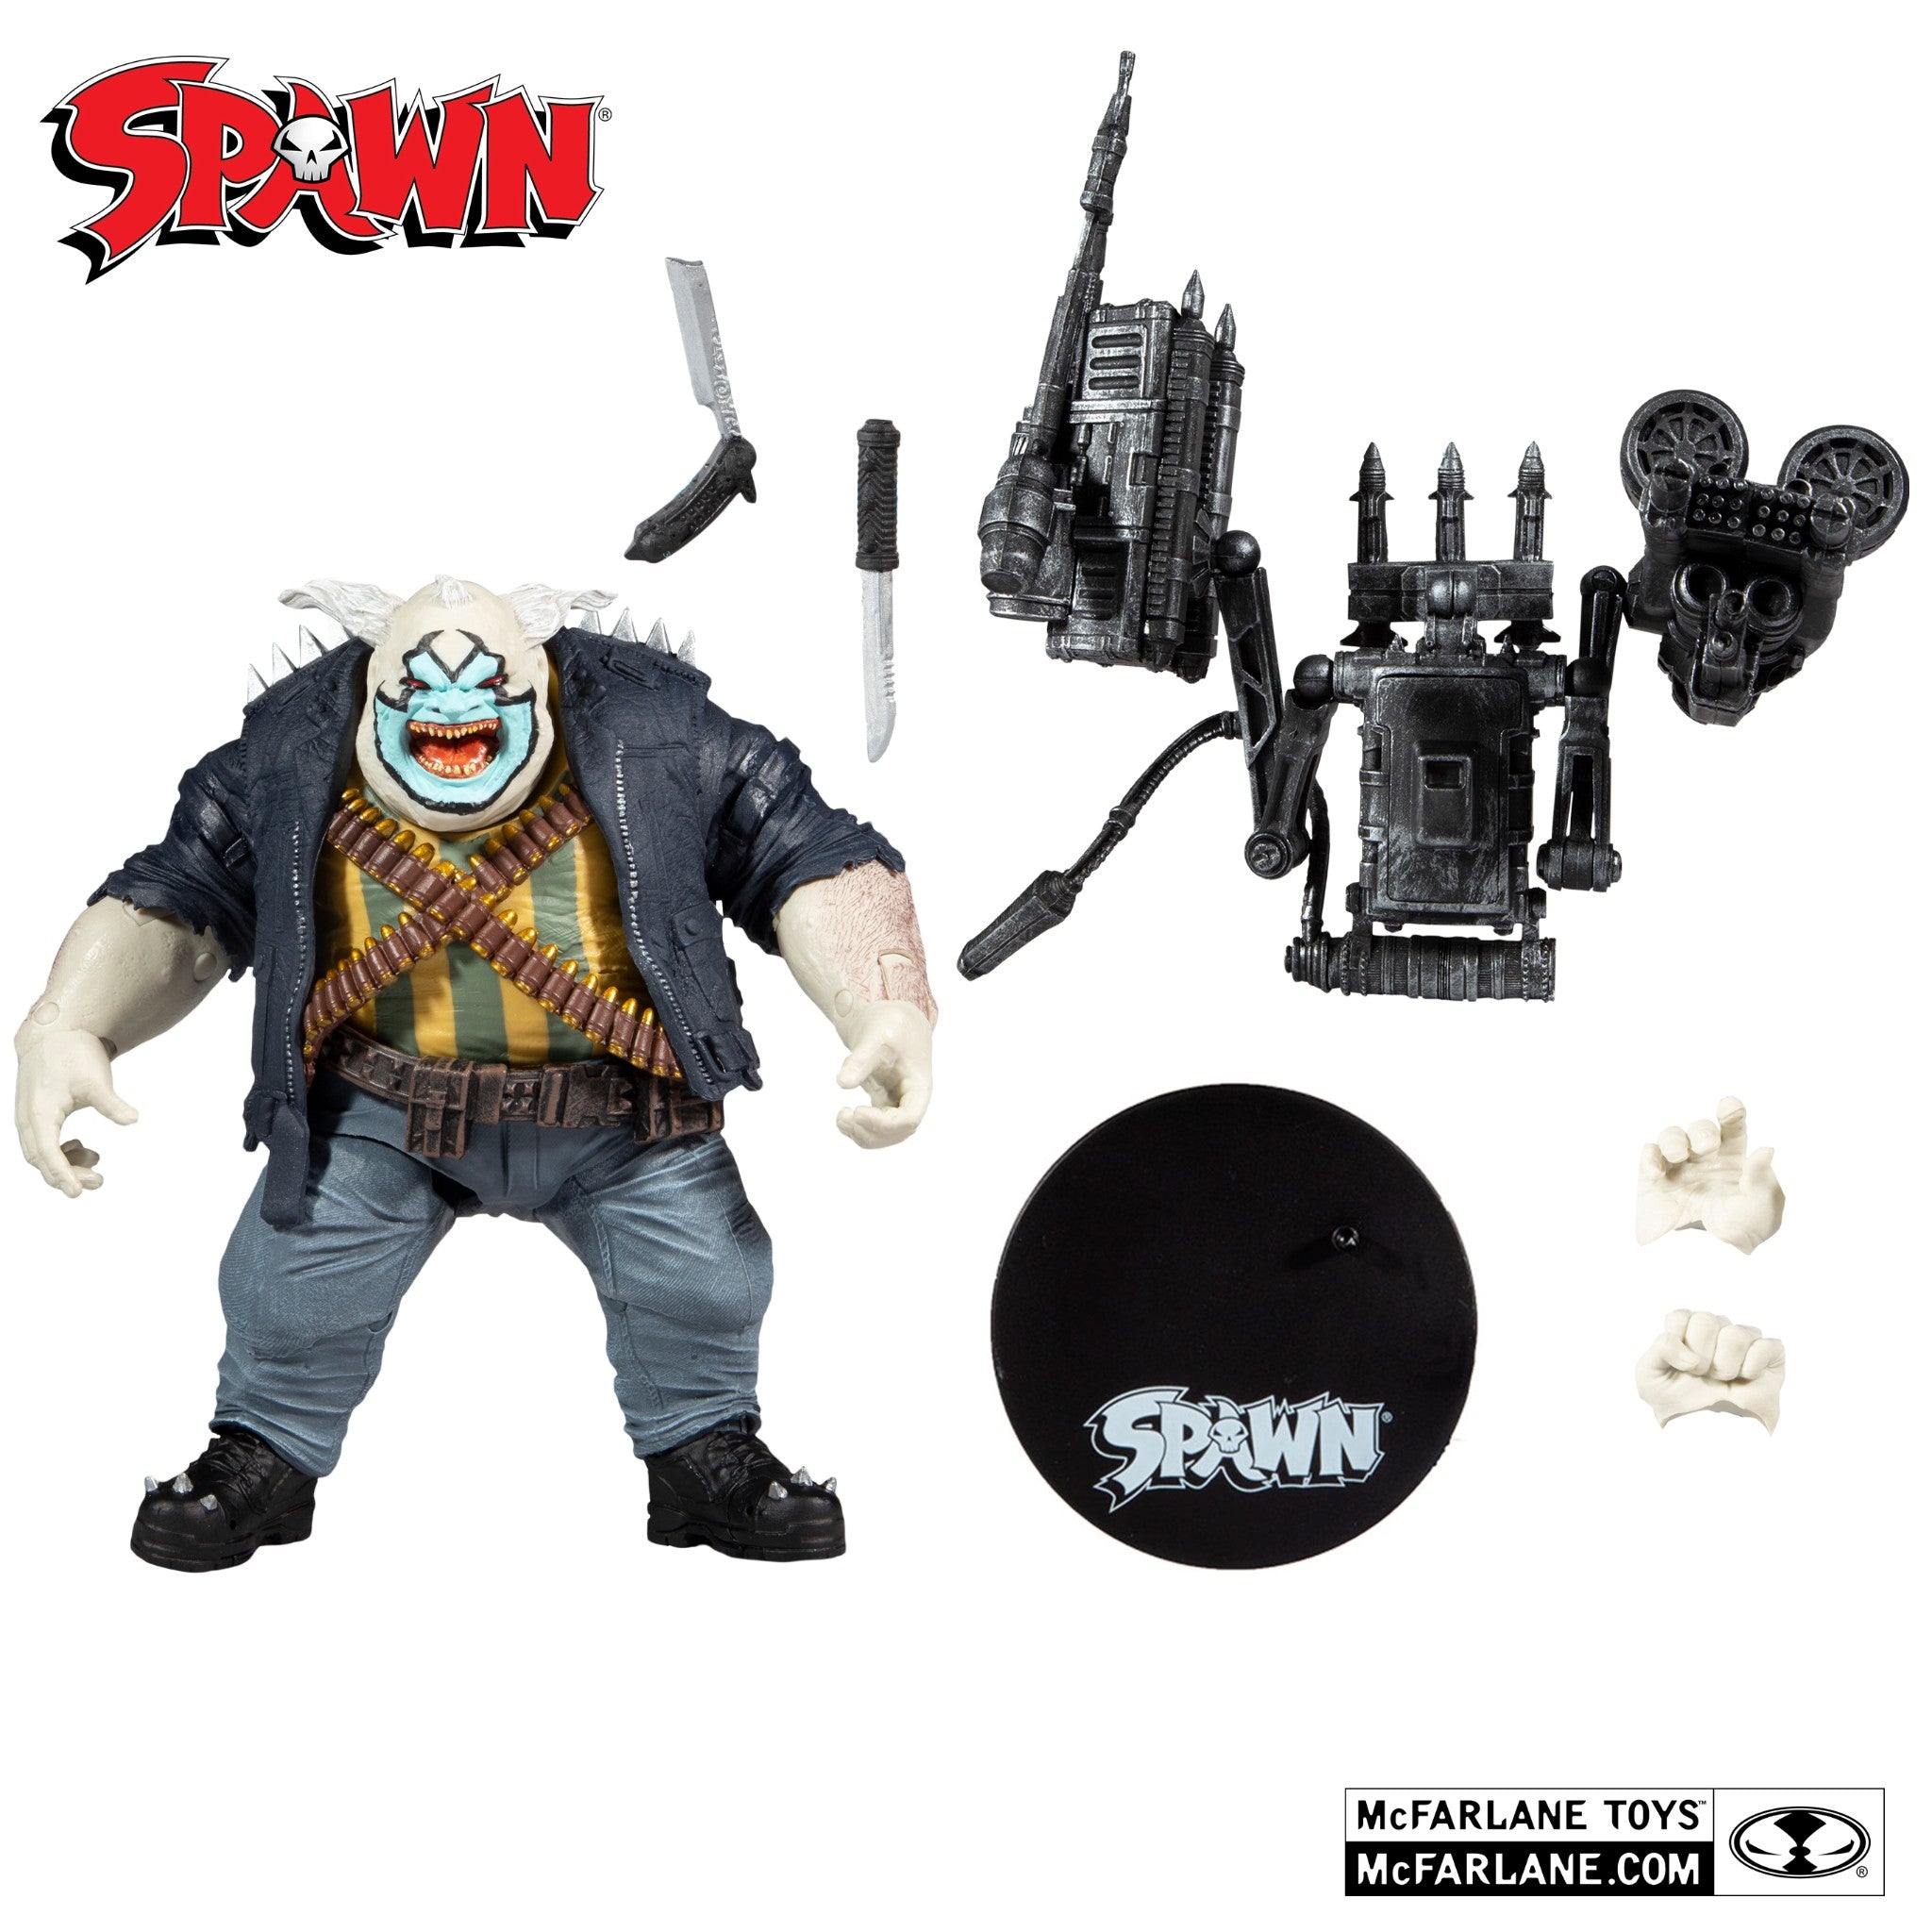 Spawn The Clown 7" Deluxe Figure- McFarlane Toys - 0